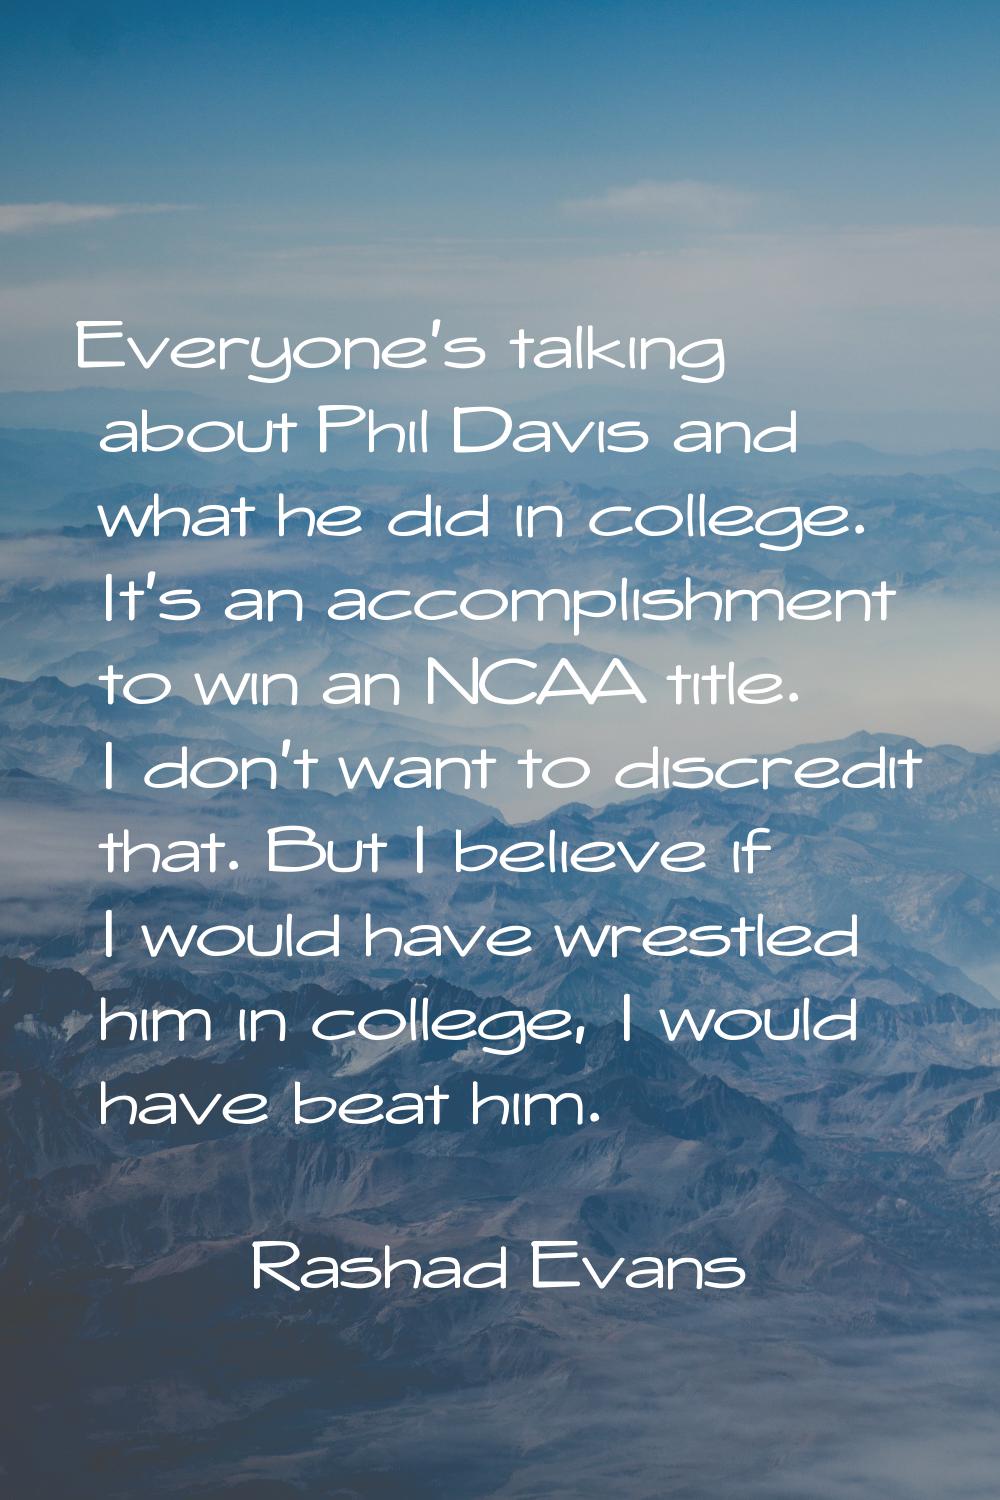 Everyone's talking about Phil Davis and what he did in college. It's an accomplishment to win an NC